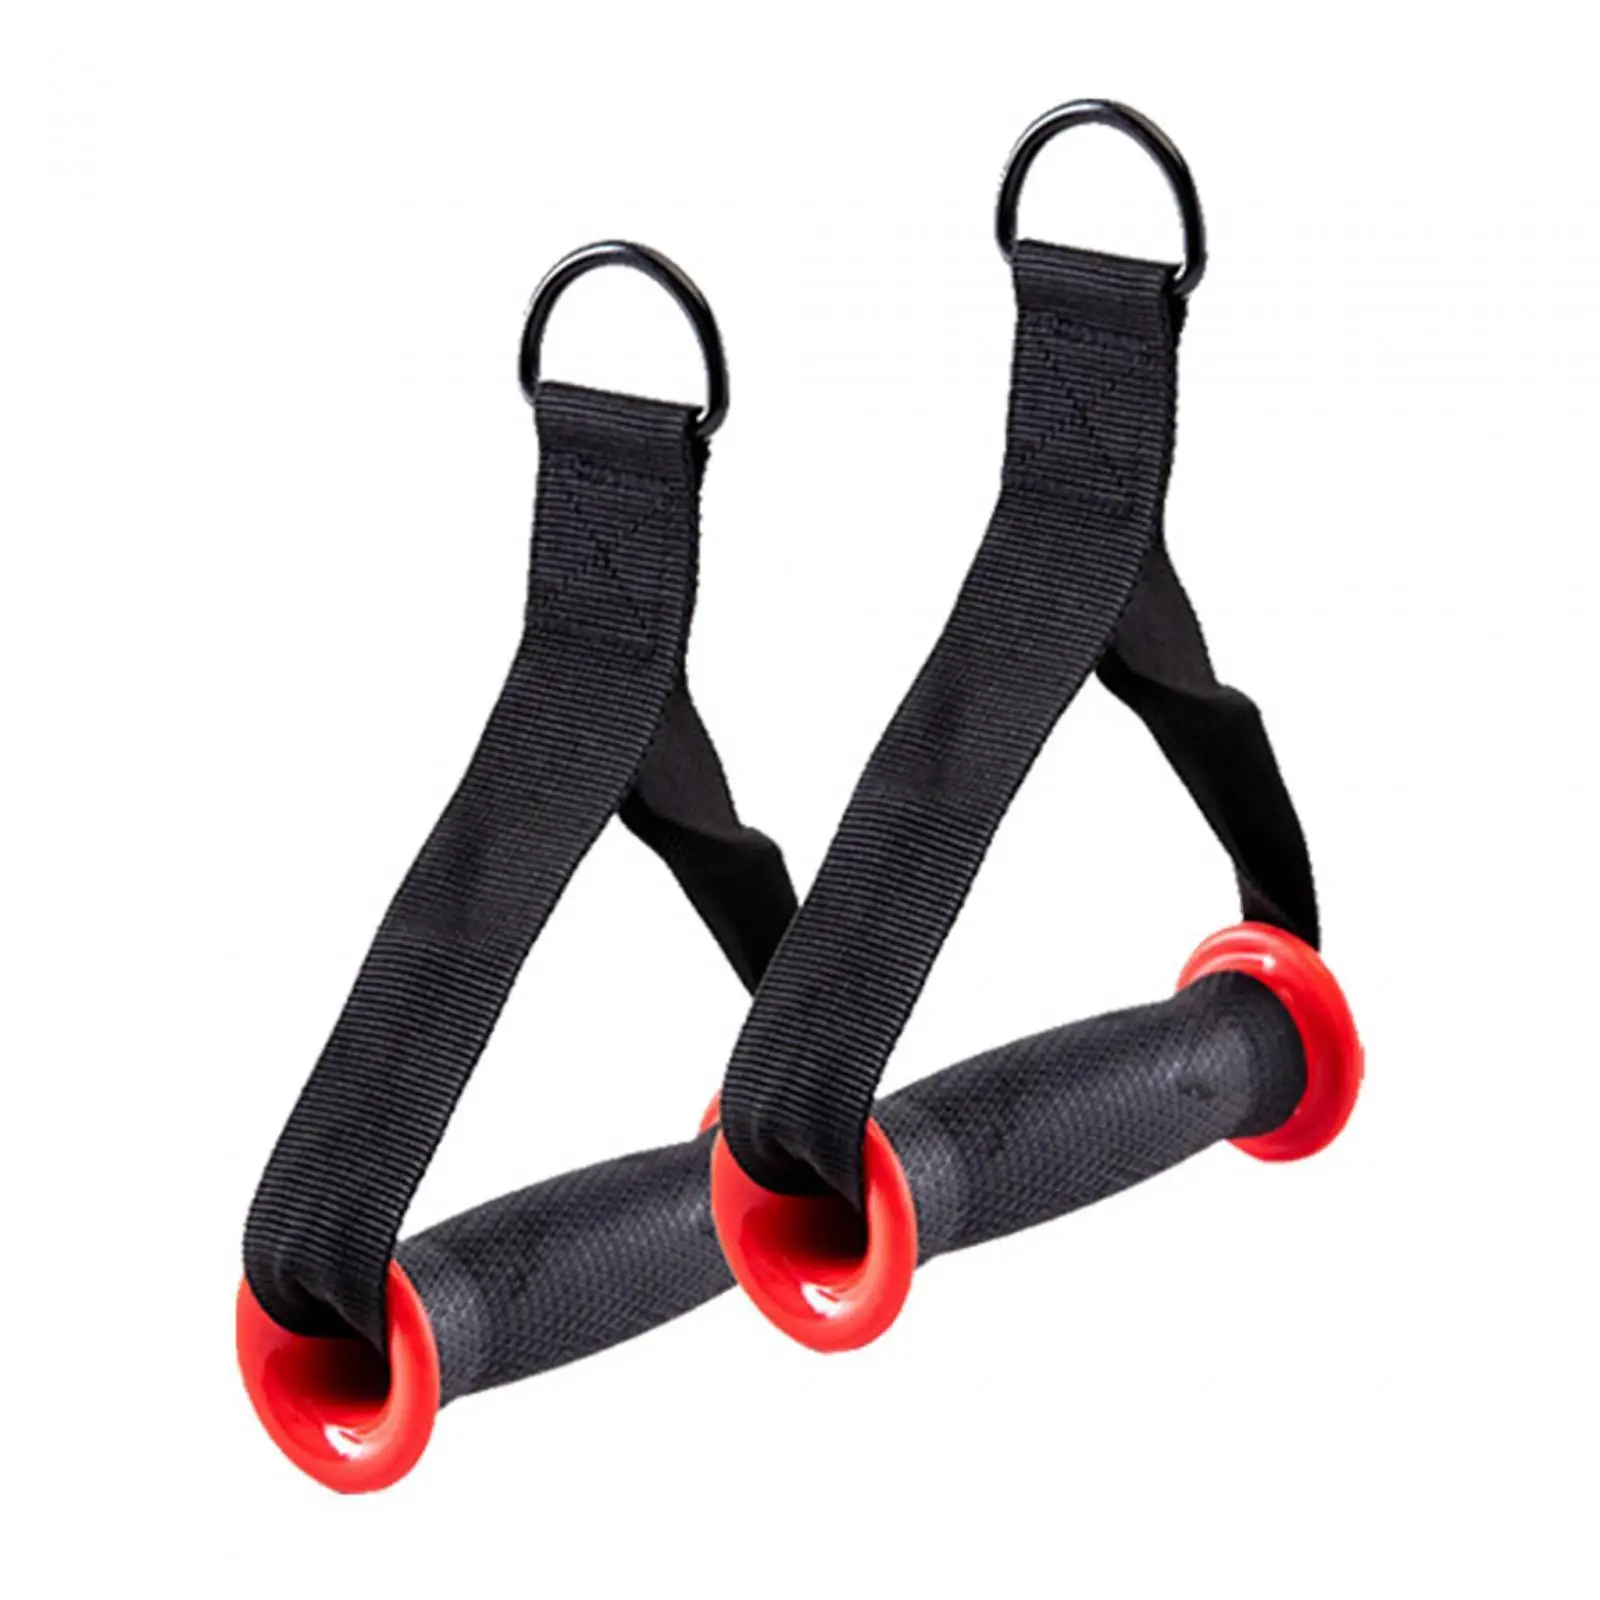 2 Pieces Gym Handle Stretch Tube Exercise Workout Grips Gym Accessory Body Fitness Multi Resistance Bands Pull up Handles